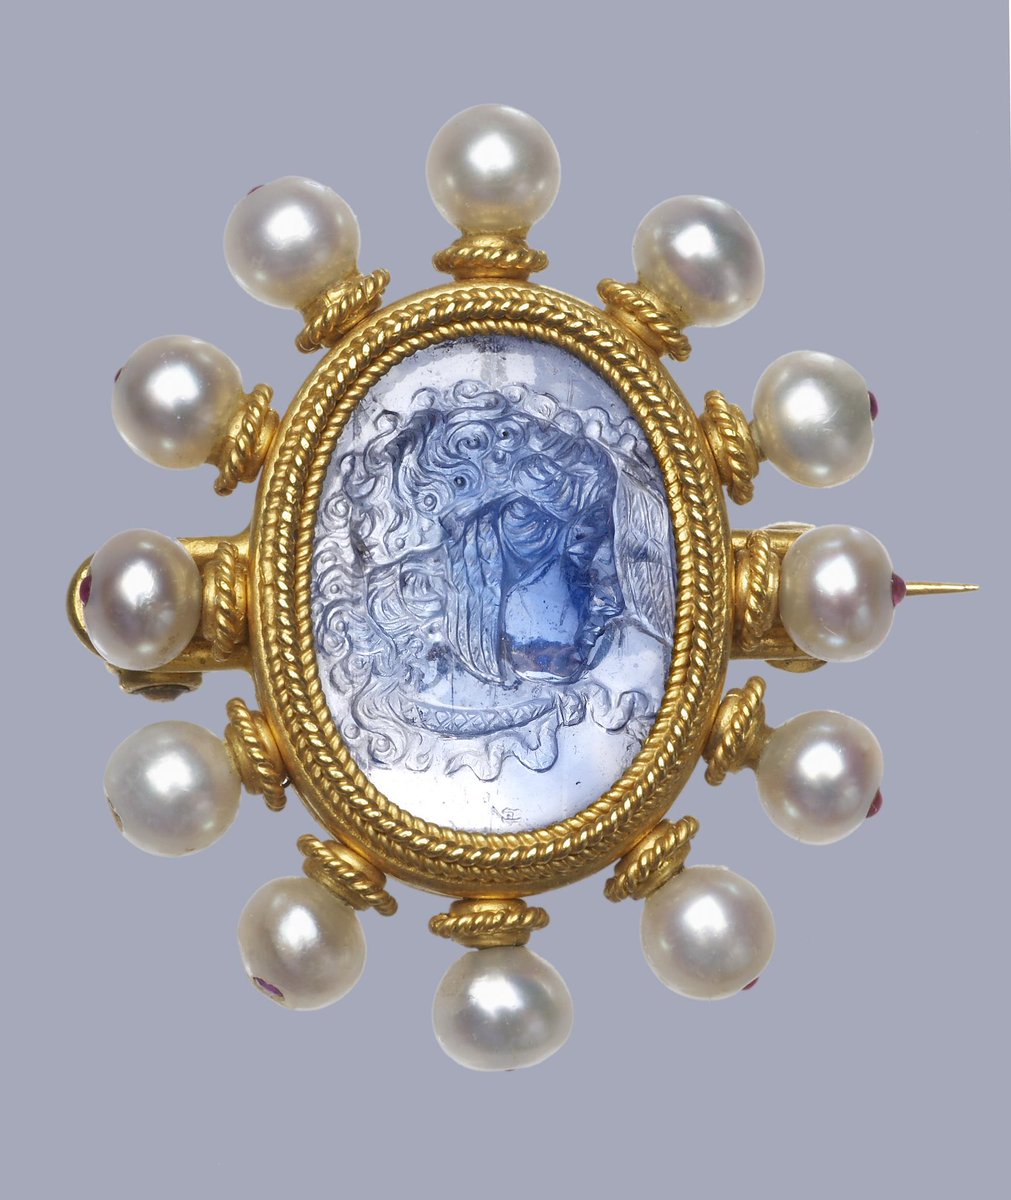 A gorgeous 19th century Italian brooch from the workshops of Castellani depicting the mythical Medusa.

Carved on a pale blue sapphire, it is bordered by ropework gold and pearls.

🏛️@britishmuseum 

#Classics #Italy #Medusa #History #Art